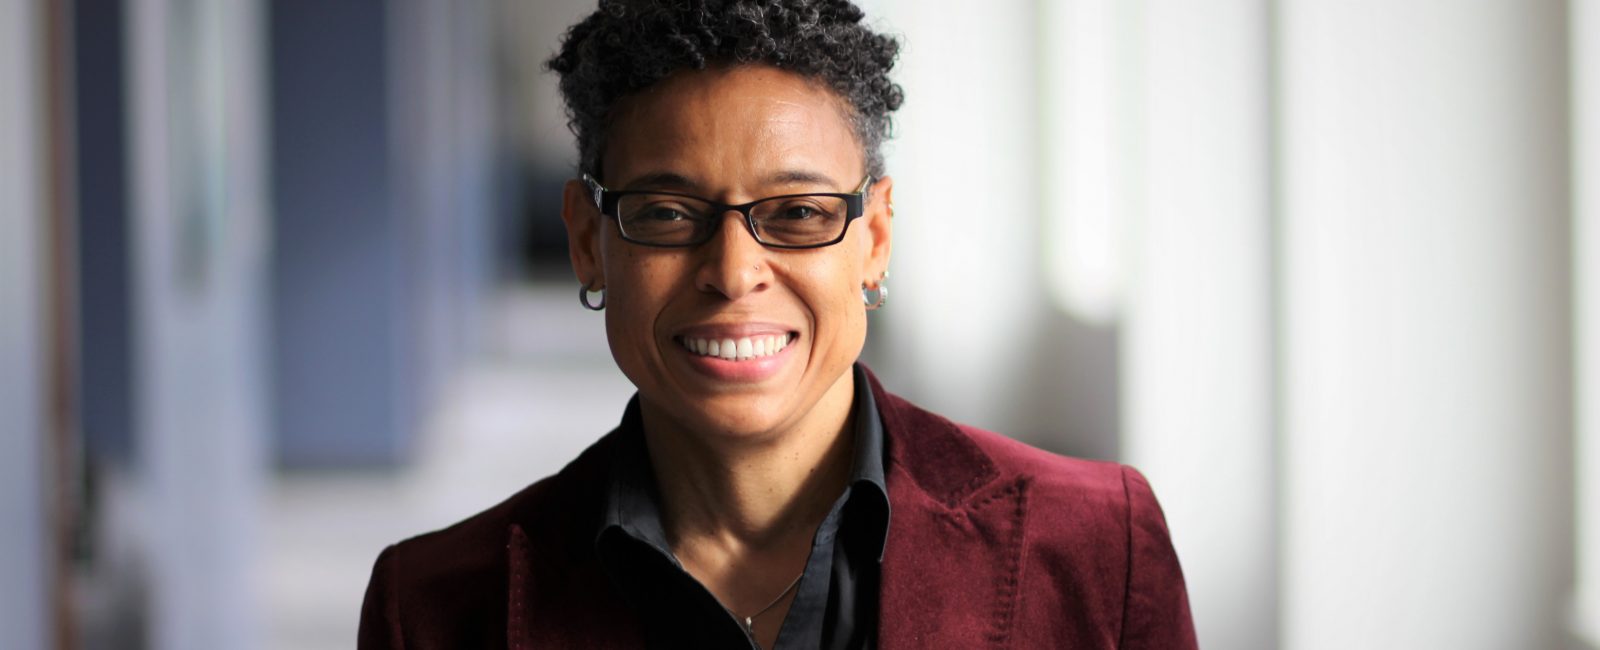 Tara Spann, Head of Diversity and Inclusion at Eversource Energy